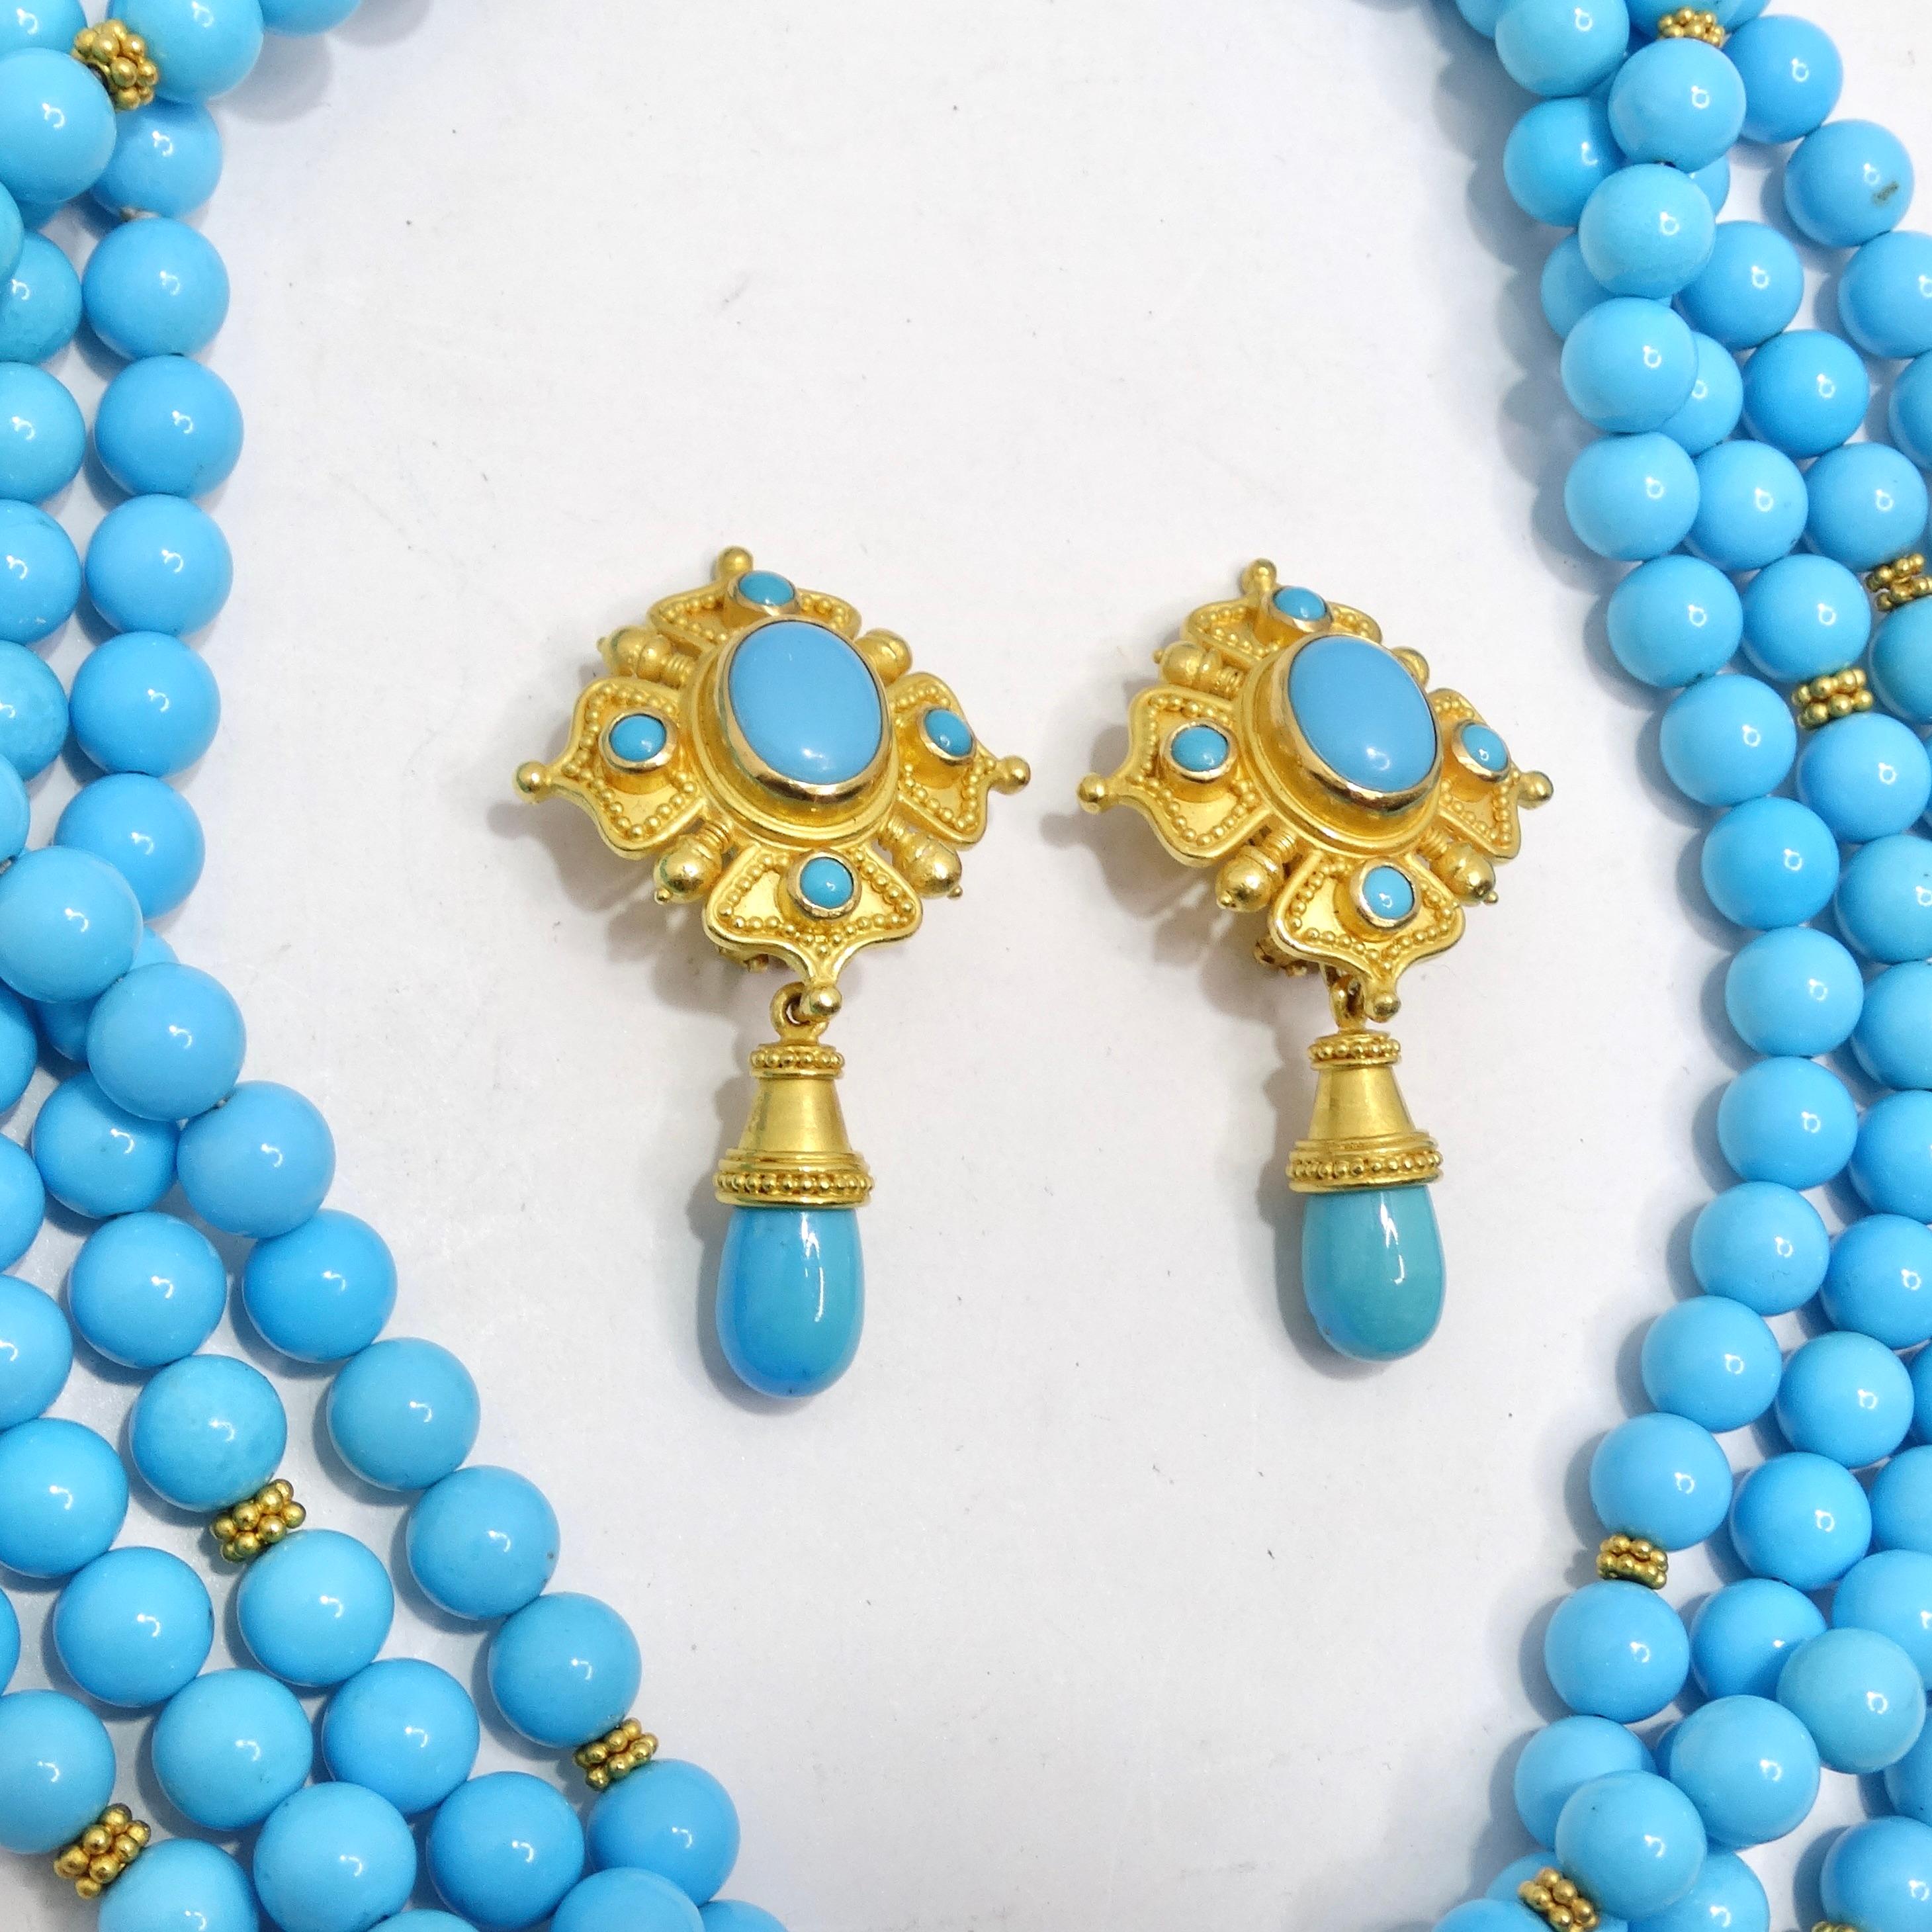 Indulge in the ultimate expression of luxury and style with the Carolyn Tyler 22K Gold Sleeping Beauty Turquoise Earrings and Necklace Set. This matching set is designed to capture hearts and make an everlasting impression. Crafted with multi